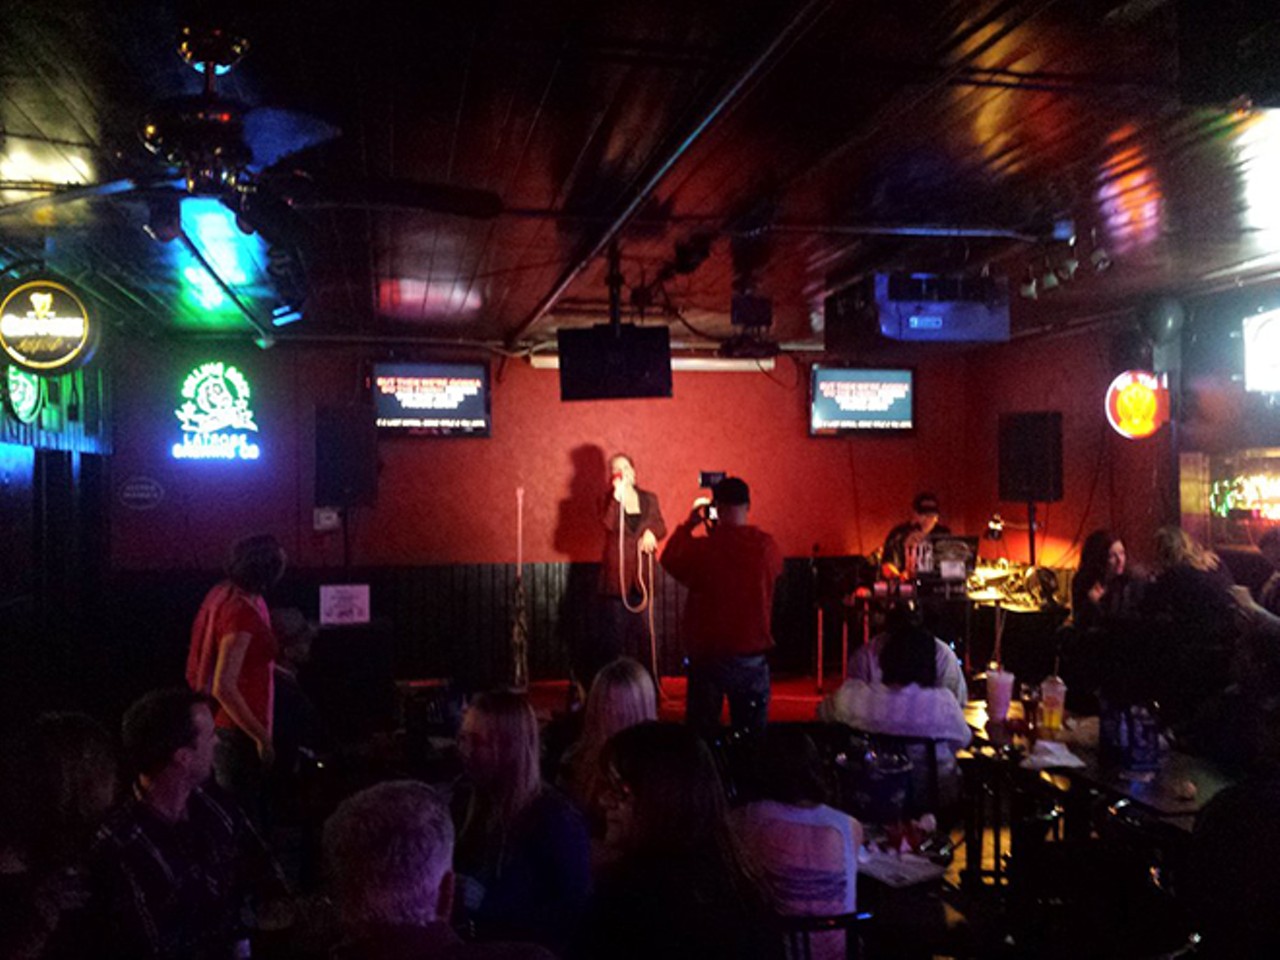 Sing your heart out at Big Daddy's
3001 Corrine Drive; 407-644-2844; bigdaddysorlando.com
"Pick from any number of classic songs and belt them out during karaoke at Big Daddy's, which happens pretty much every night of the week."
Photo via Yelp